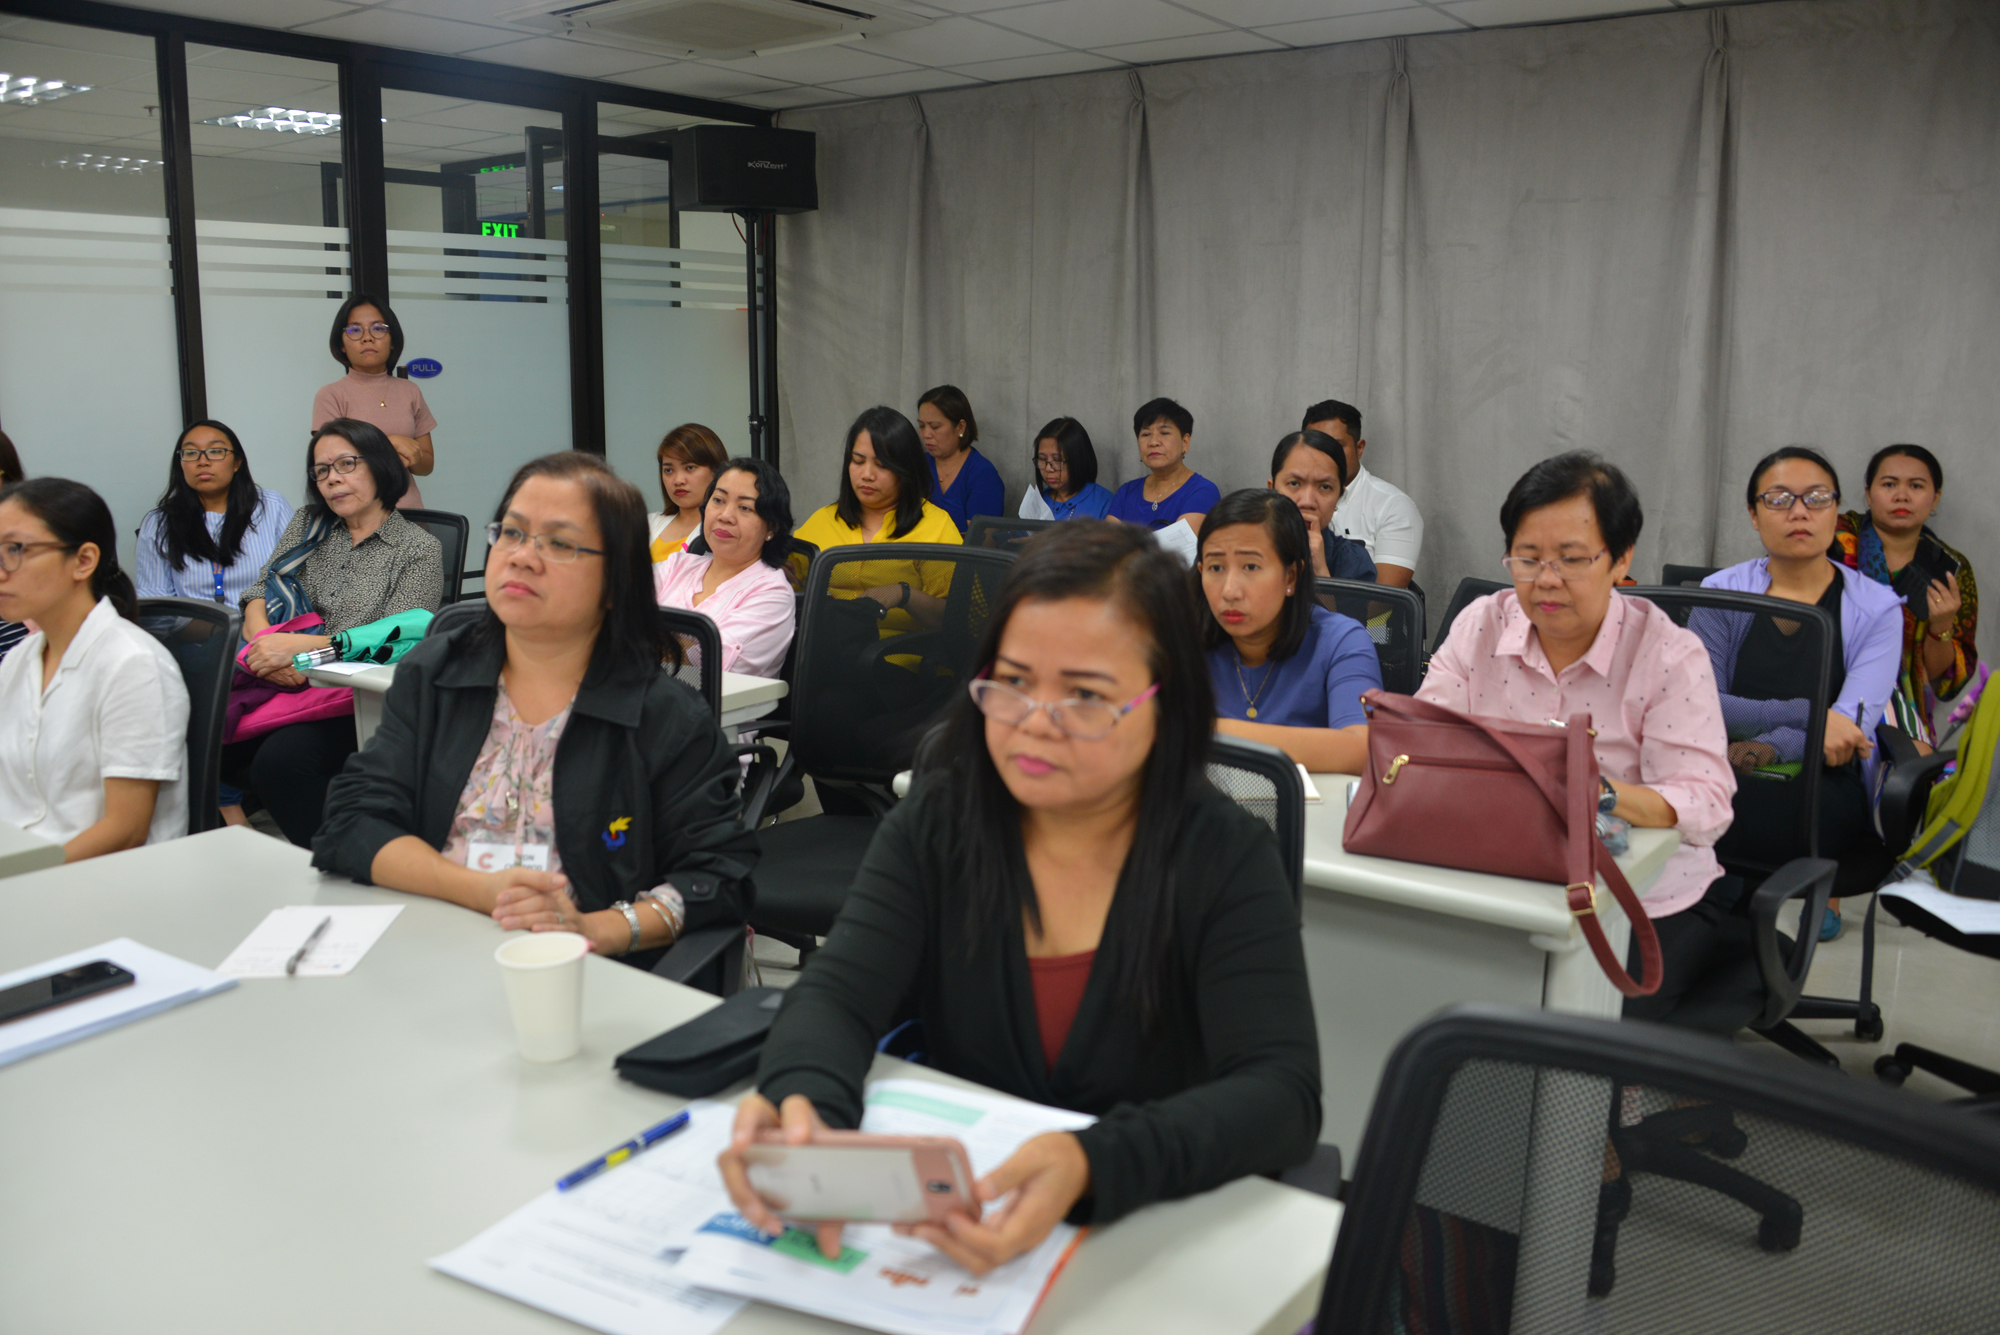 Public Seminar on Poverty and Child Stunting-pids-poverty-4-20190725.jpg